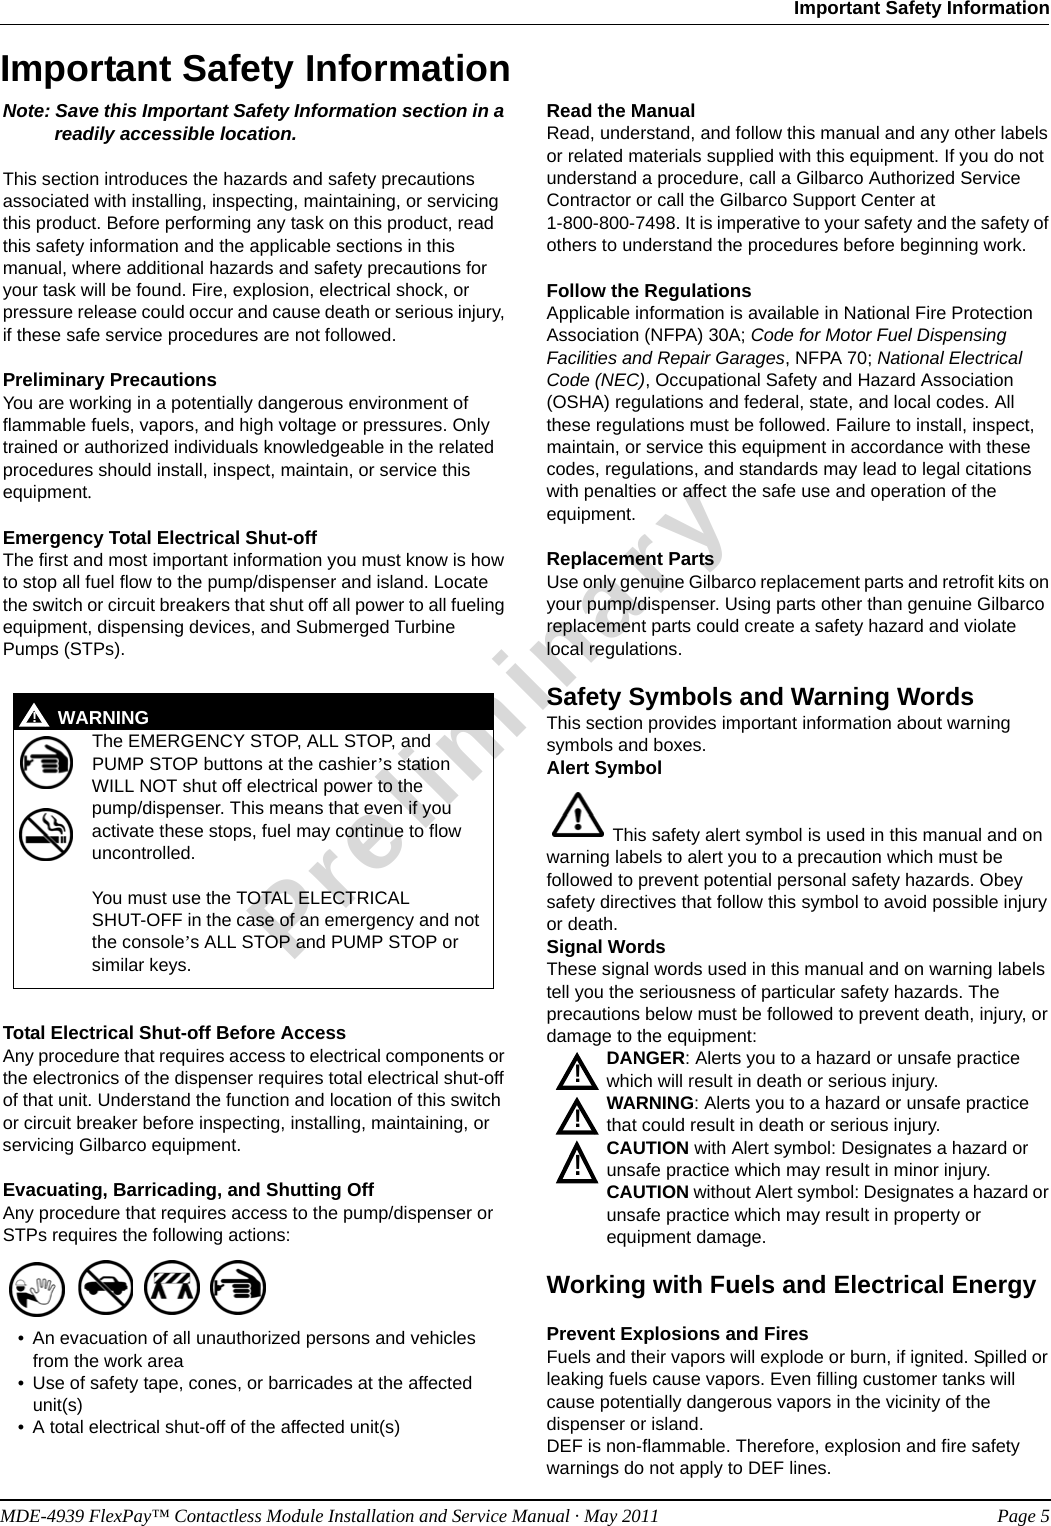 MDE-4939 FlexPay™ Contactless Module Installation and Service Manual · May 2011 Page 5Important Safety InformationPreliminaryImportant Safety InformationNote: Save this Important Safety Information section in a readily accessible location.This section introduces the hazards and safety precautions associated with installing, inspecting, maintaining, or servicing this product. Before performing any task on this product, read this safety information and the applicable sections in this manual, where additional hazards and safety precautions for your task will be found. Fire, explosion, electrical shock, or pressure release could occur and cause death or serious injury, if these safe service procedures are not followed. Preliminary PrecautionsYou are working in a potentially dangerous environment of flammable fuels, vapors, and high voltage or pressures. Only trained or authorized individuals knowledgeable in the related procedures should install, inspect, maintain, or service this equipment.Emergency Total Electrical Shut-offThe first and most important information you must know is how to stop all fuel flow to the pump/dispenser and island. Locate the switch or circuit breakers that shut off all power to all fueling equipment, dispensing devices, and Submerged Turbine Pumps (STPs).  Total Electrical Shut-off Before AccessAny procedure that requires access to electrical components or the electronics of the dispenser requires total electrical shut-off of that unit. Understand the function and location of this switch or circuit breaker before inspecting, installing, maintaining, or servicing Gilbarco equipment.Evacuating, Barricading, and Shutting OffAny procedure that requires access to the pump/dispenser or STPs requires the following actions:• An evacuation of all unauthorized persons and vehicles from the work area• Use of safety tape, cones, or barricades at the affected unit(s)• A total electrical shut-off of the affected unit(s)Read the ManualRead, understand, and follow this manual and any other labels or related materials supplied with this equipment. If you do not understand a procedure, call a Gilbarco Authorized Service Contractor or call the Gilbarco Support Center at  1-800-800-7498. It is imperative to your safety and the safety of others to understand the procedures before beginning work.Follow the RegulationsApplicable information is available in National Fire Protection Association (NFPA) 30A; Code for Motor Fuel Dispensing Facilities and Repair Garages, NFPA 70; National Electrical Code (NEC), Occupational Safety and Hazard Association (OSHA) regulations and federal, state, and local codes. All these regulations must be followed. Failure to install, inspect, maintain, or service this equipment in accordance with these codes, regulations, and standards may lead to legal citations with penalties or affect the safe use and operation of the equipment.Replacement PartsUse only genuine Gilbarco replacement parts and retrofit kits on your pump/dispenser. Using parts other than genuine Gilbarco replacement parts could create a safety hazard and violate local regulations.Safety Symbols and Warning WordsThis section provides important information about warning symbols and boxes.Alert Symbol  This safety alert symbol is used in this manual and on warning labels to alert you to a precaution which must be followed to prevent potential personal safety hazards. Obey safety directives that follow this symbol to avoid possible injury or death.Signal WordsThese signal words used in this manual and on warning labels tell you the seriousness of particular safety hazards. The precautions below must be followed to prevent death, injury, or damage to the equipment:DANGER: Alerts you to a hazard or unsafe practice which will result in death or serious injury.WARNING: Alerts you to a hazard or unsafe practice that could result in death or serious injury. CAUTION with Alert symbol: Designates a hazard or unsafe practice which may result in minor injury.CAUTION without Alert symbol: Designates a hazard or unsafe practice which may result in property or equipment damage.Working with Fuels and Electrical EnergyPrevent Explosions and FiresFuels and their vapors will explode or burn, if ignited. Spilled or leaking fuels cause vapors. Even filling customer tanks will cause potentially dangerous vapors in the vicinity of the dispenser or island.DEF is non-flammable. Therefore, explosion and fire safety warnings do not apply to DEF lines.The EMERGENCY STOP, ALL STOP, and PUMP STOP buttons at the cashier’s station WILL NOT shut off electrical power to the  pump/dispenser. This means that even if you activate these stops, fuel may continue to flow uncontrolled. You must use the TOTAL ELECTRICAL  SHUT-OFF in the case of an emergency and not the console’s ALL STOP and PUMP STOP or similar keys.!WARNING!!!!